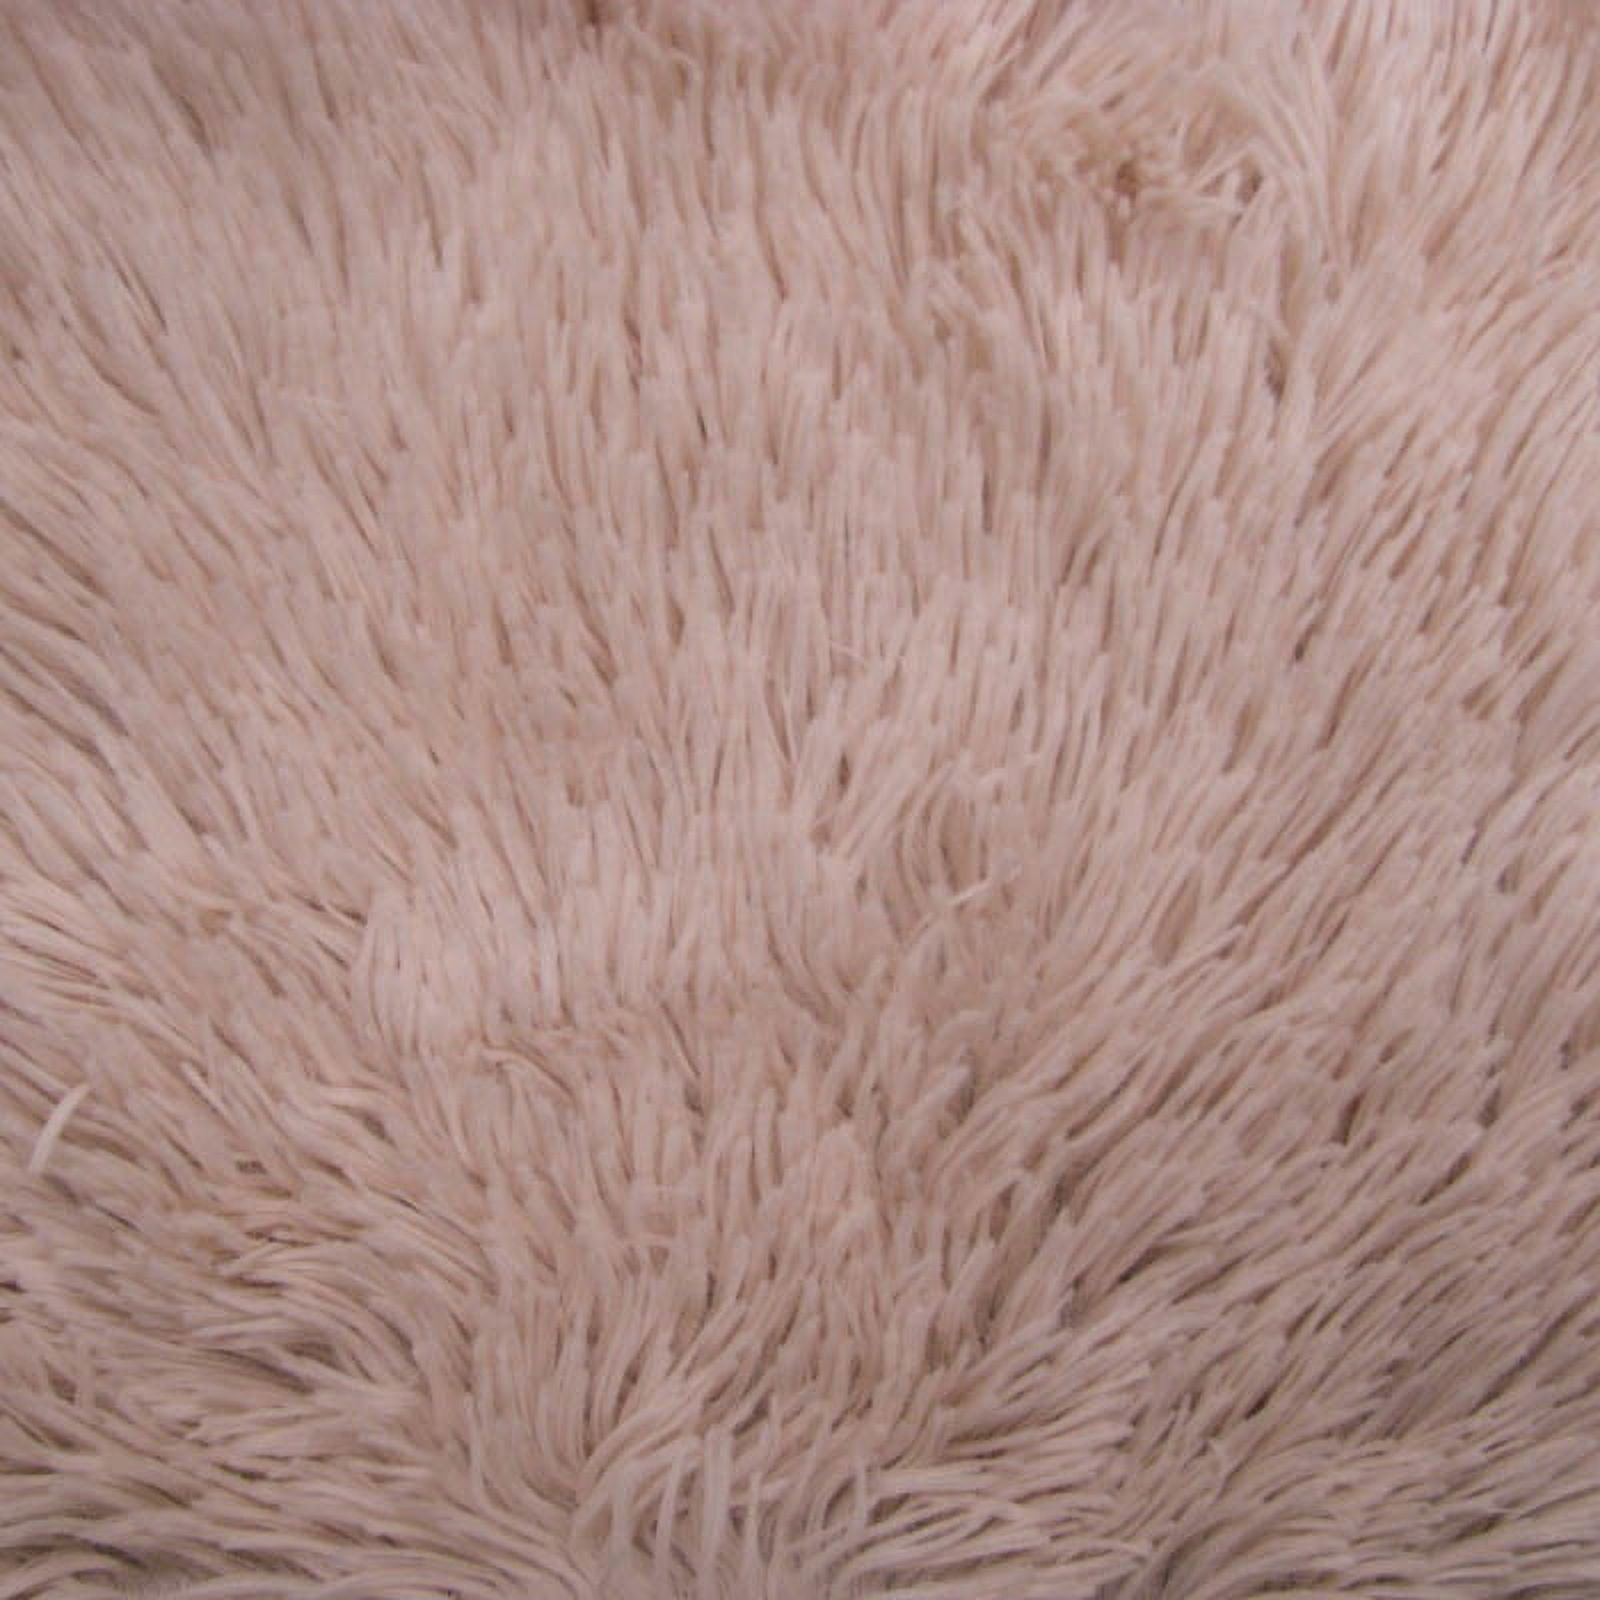 FabricLA Shaggy Faux Fur Fabric by The Yard - 36 x 60 Inches (90 cm x 150  cm) - Fake Fur Fabric for Sewing Apparel, Vests, Jackets, Rugs, Pillows 